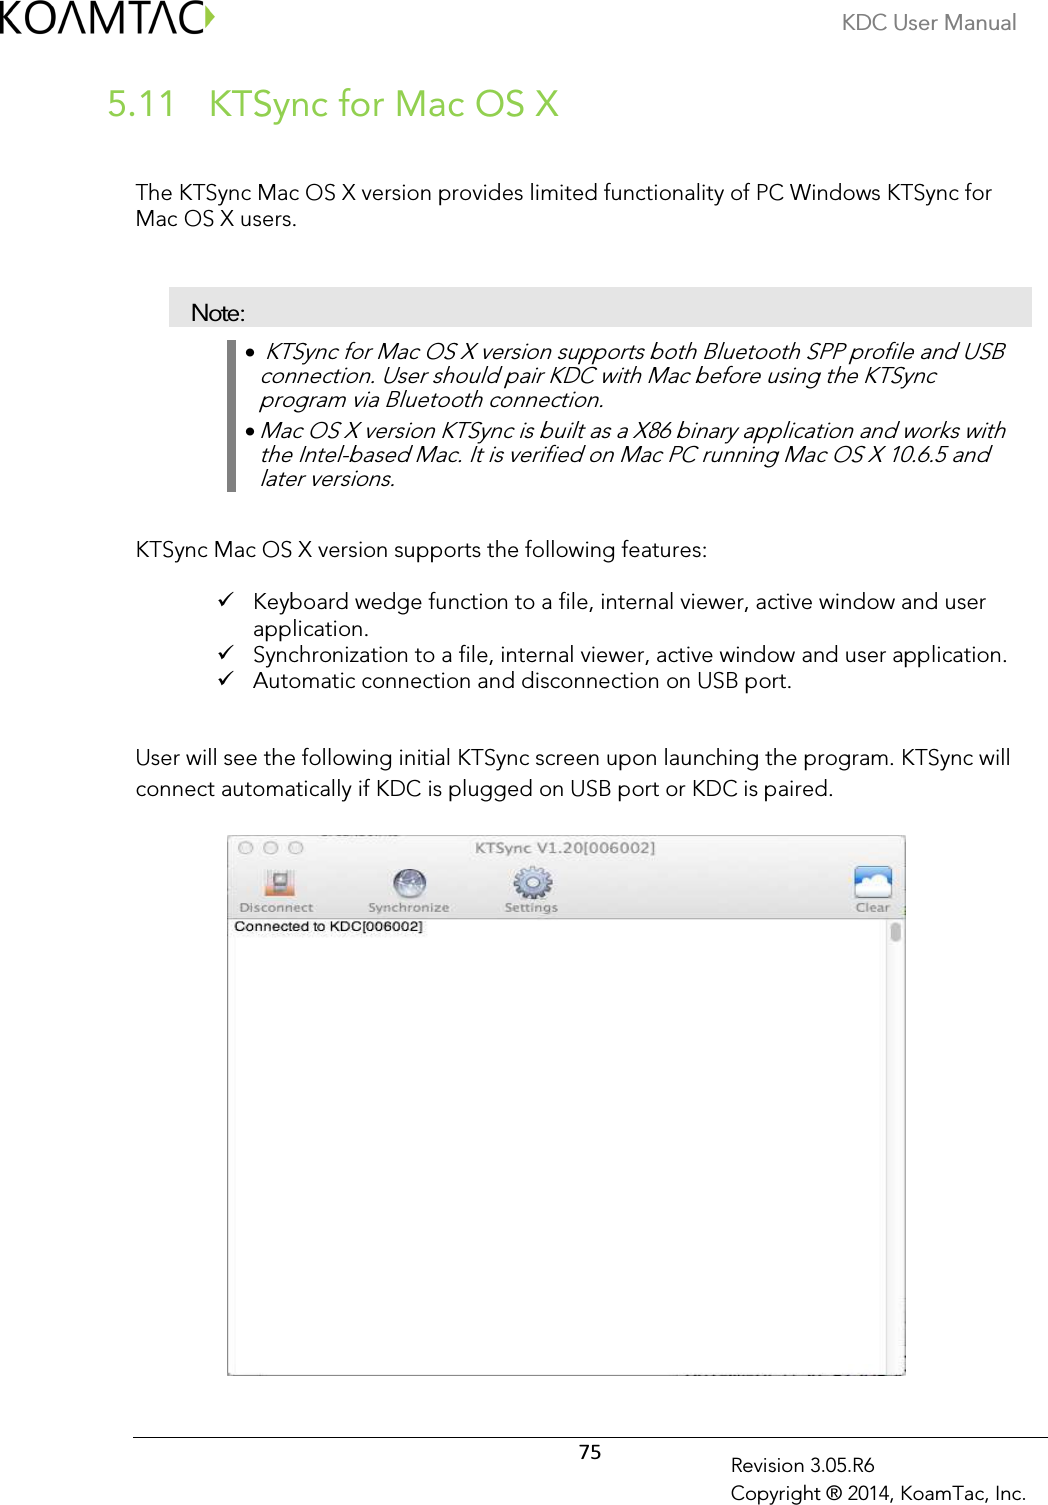 KDC User Manual  75 Revision 3.05.R6 Copyright ® 2014, KoamTac, Inc.  KTSync for Mac OS X 5.11  The KTSync Mac OS X version provides limited functionality of PC Windows KTSync for Mac OS X users.   Note: •  KTSync for Mac OS X version supports both Bluetooth SPP profile and USB connection. User should pair KDC with Mac before using the KTSync program via Bluetooth connection.  • Mac OS X version KTSync is built as a X86 binary application and works with the Intel-based Mac. It is verified on Mac PC running Mac OS X 10.6.5 and later versions.  KTSync Mac OS X version supports the following features:   Keyboard wedge function to a file, internal viewer, active window and user application.  Synchronization to a file, internal viewer, active window and user application.  Automatic connection and disconnection on USB port.  User will see the following initial KTSync screen upon launching the program. KTSync will connect automatically if KDC is plugged on USB port or KDC is paired.            